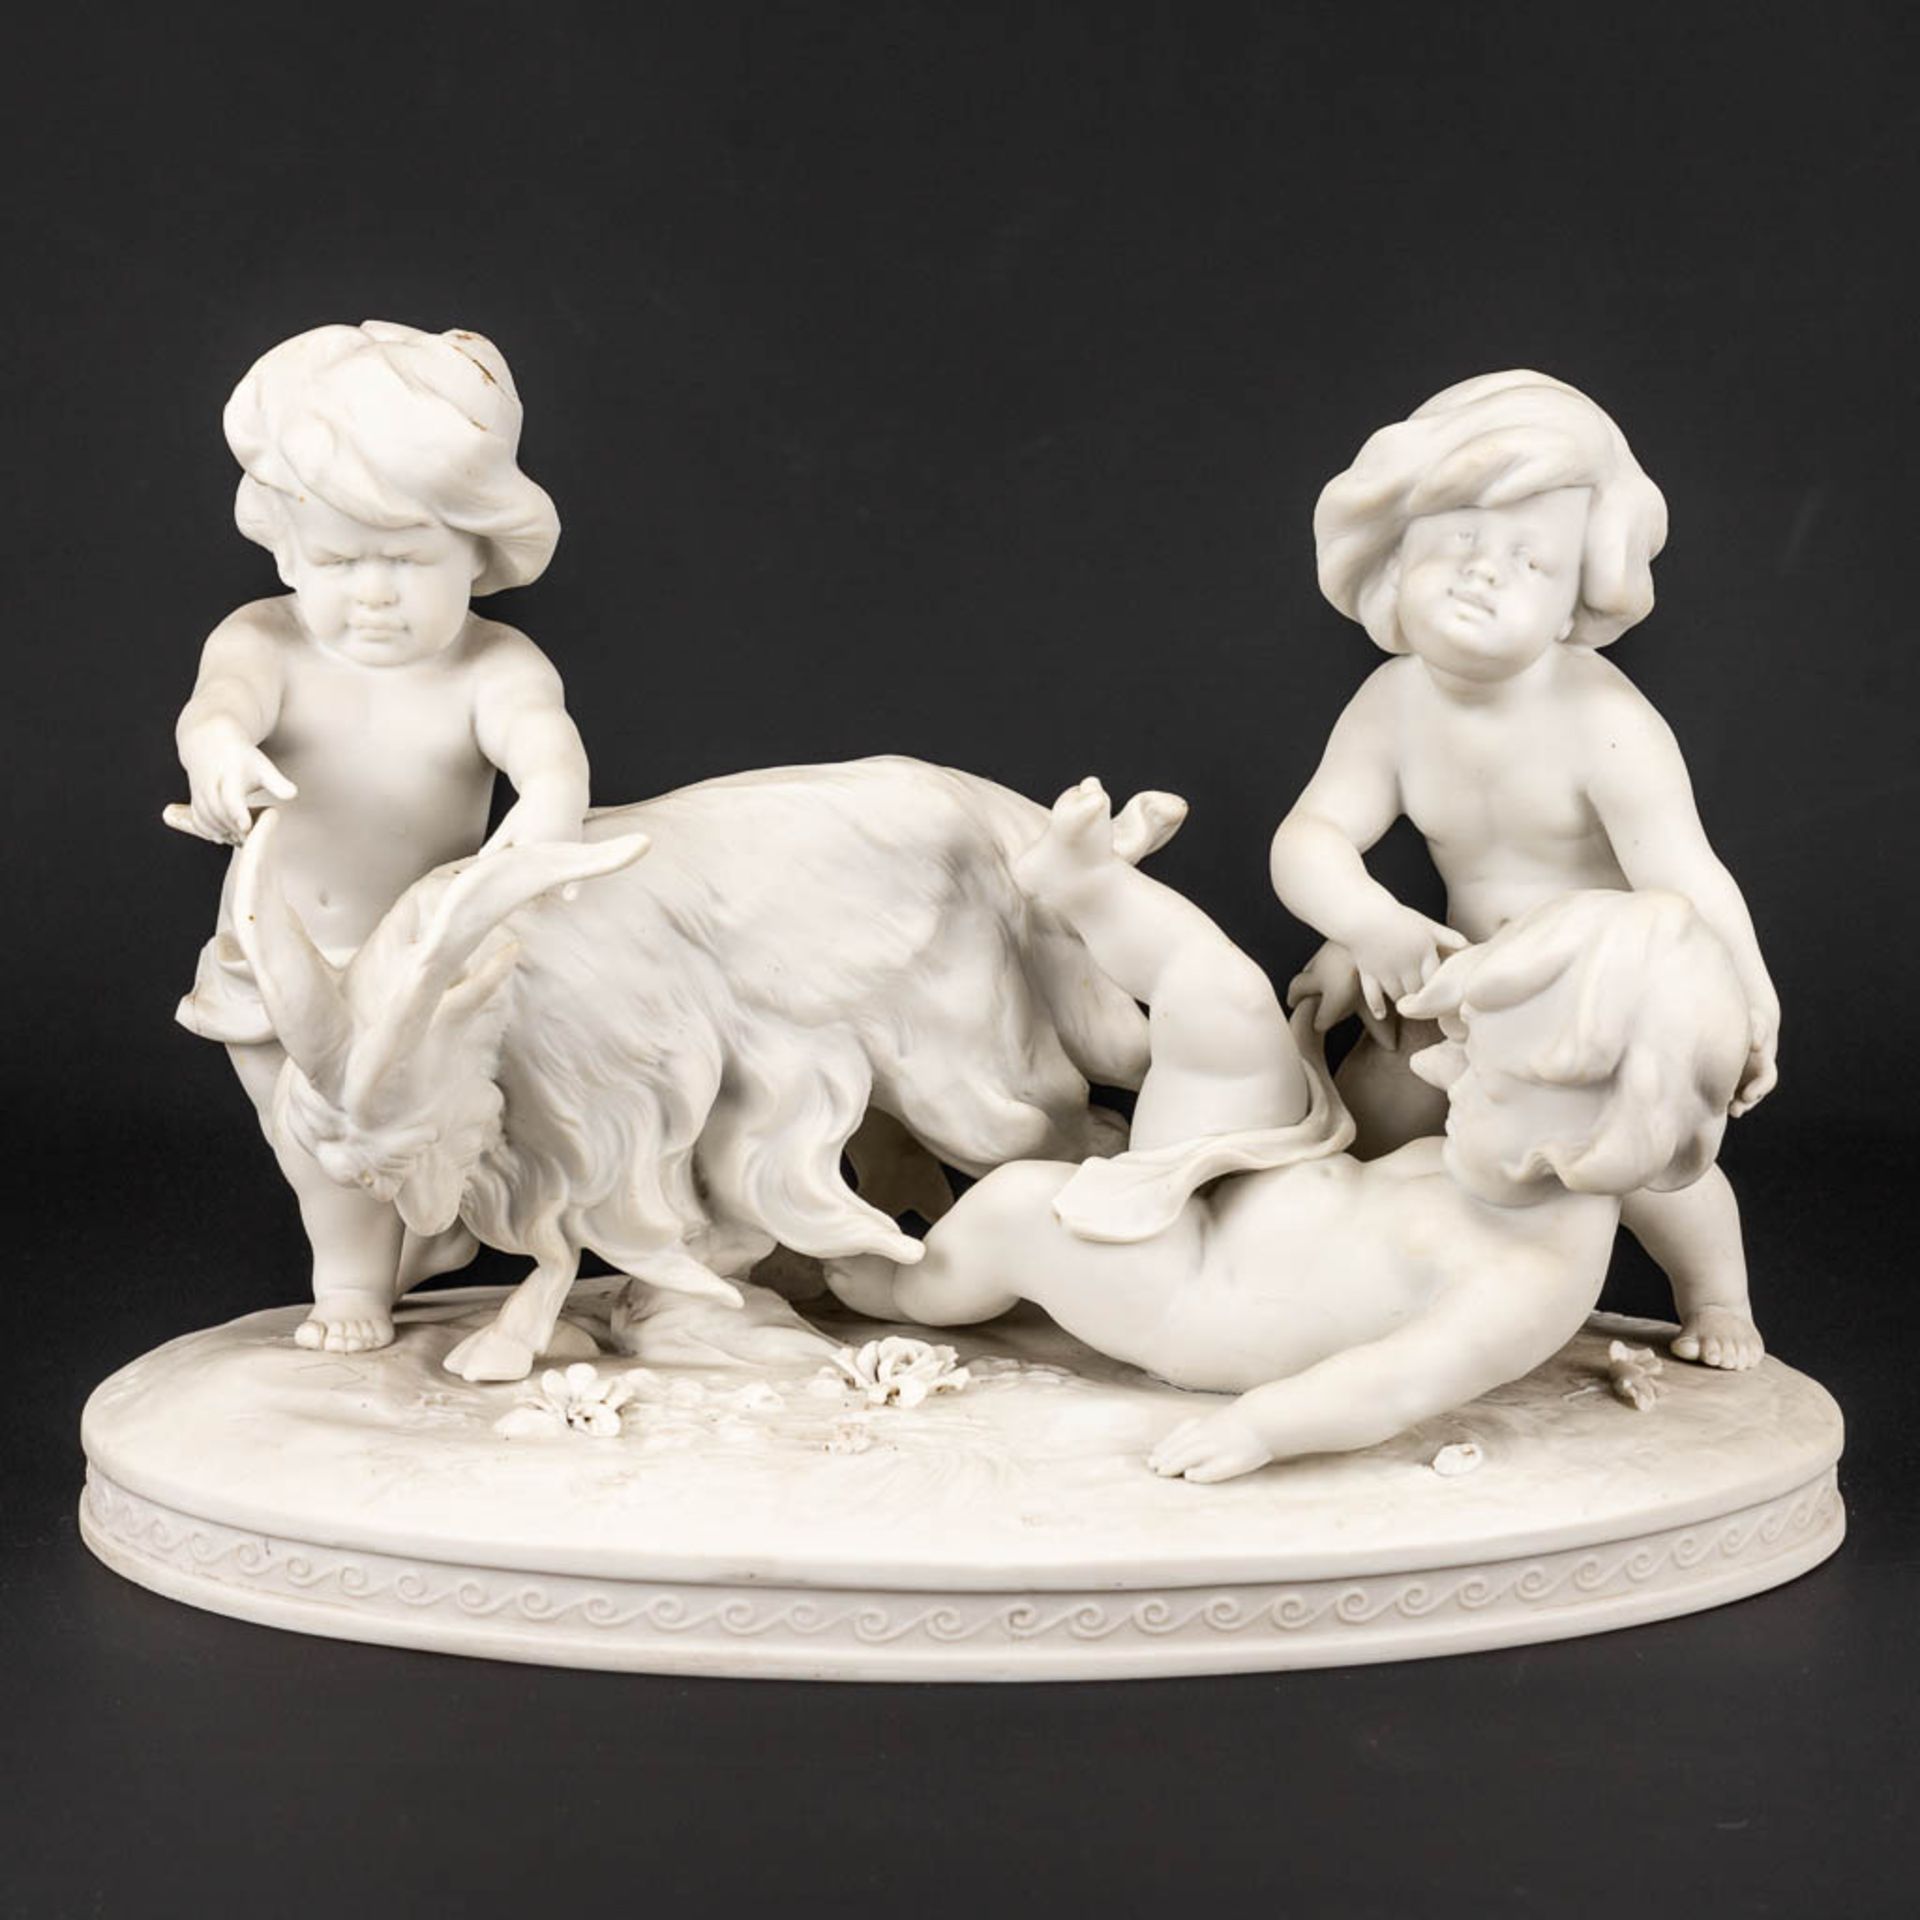 A group of kids and a goat made of biscuit porcelain and marked Richard Eckert& Co, Volkstedt.